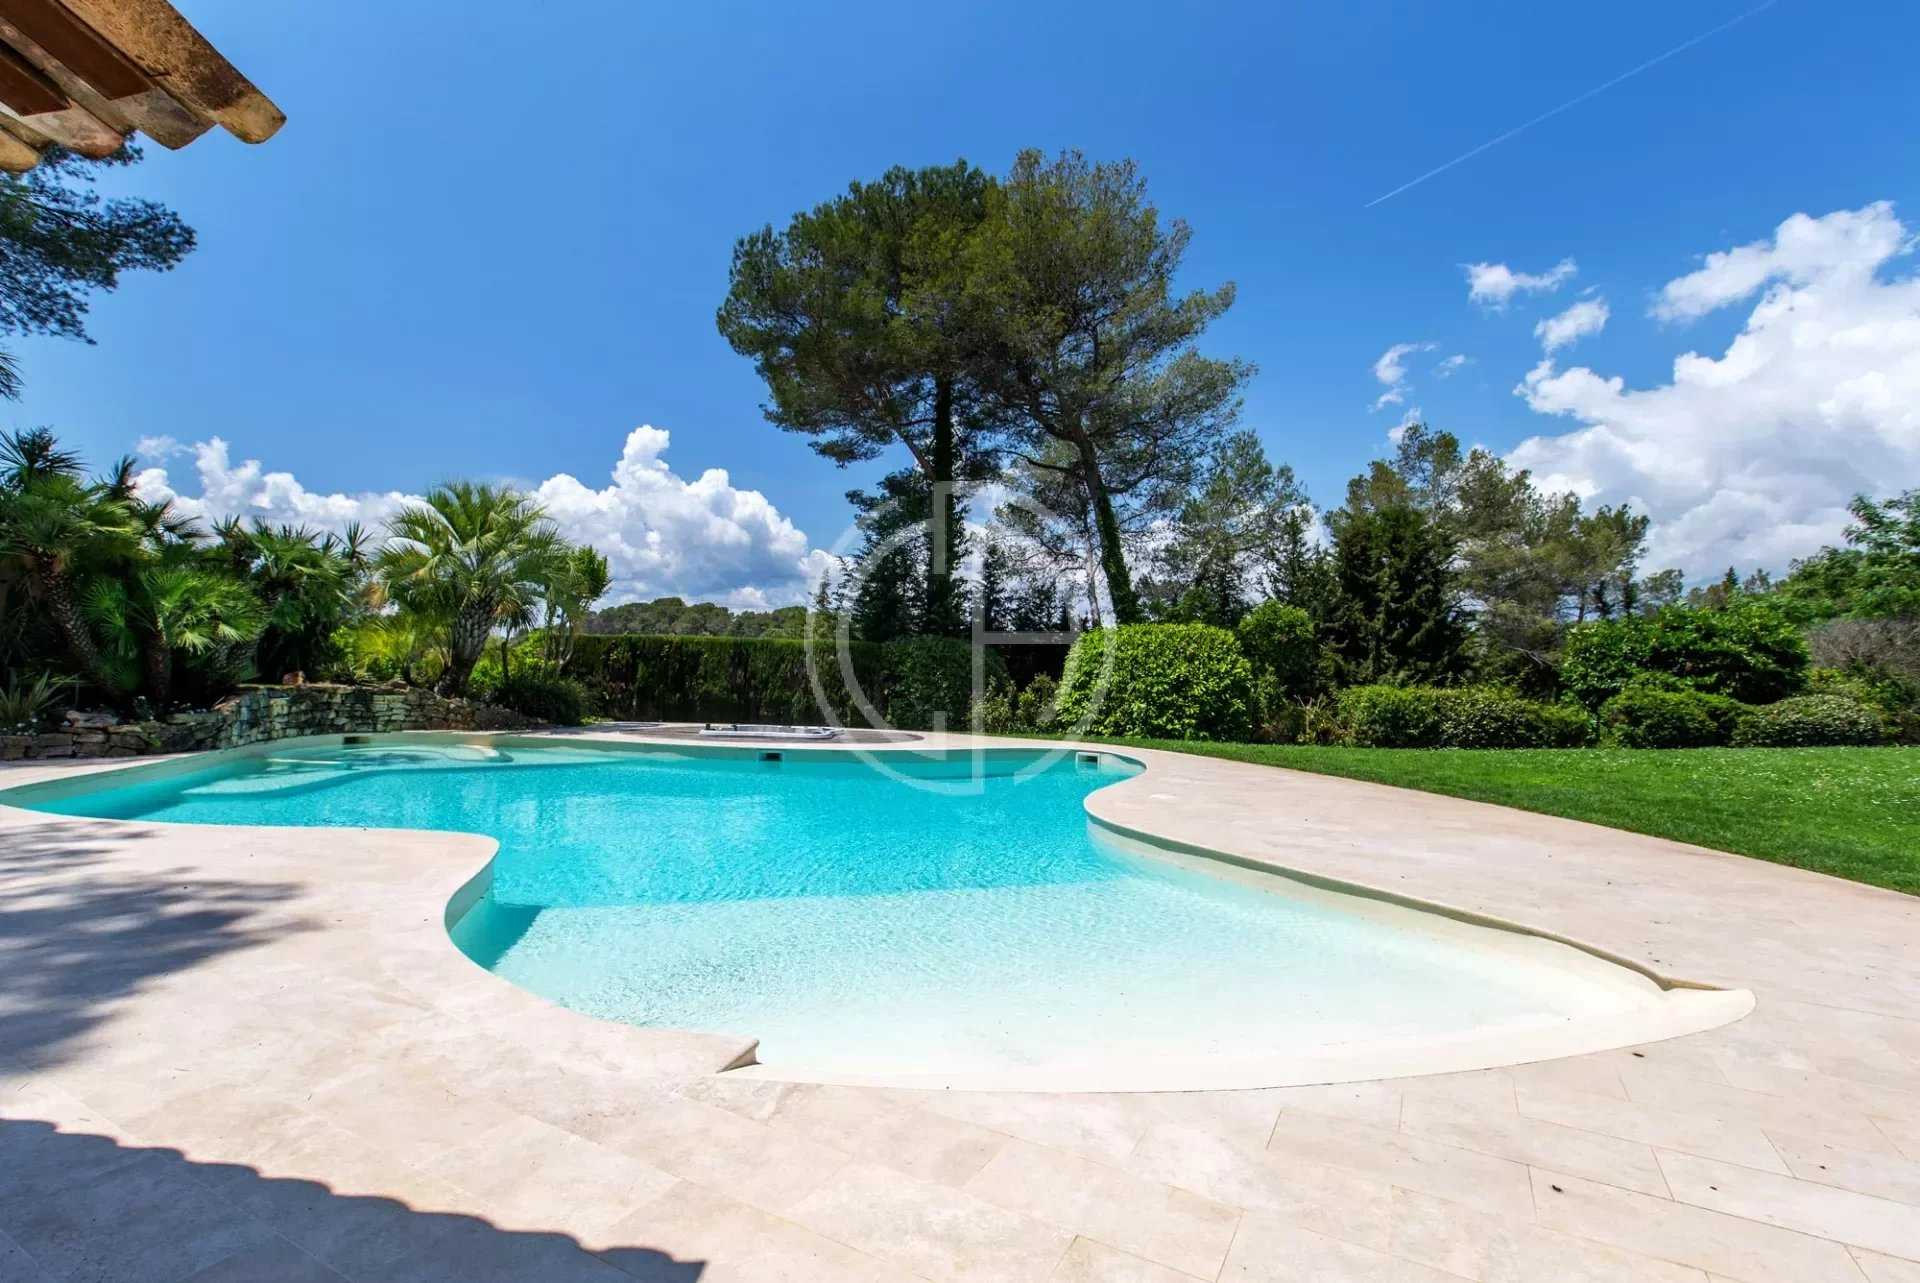 Residential in Mougins, Alpes-Maritimes 12197245